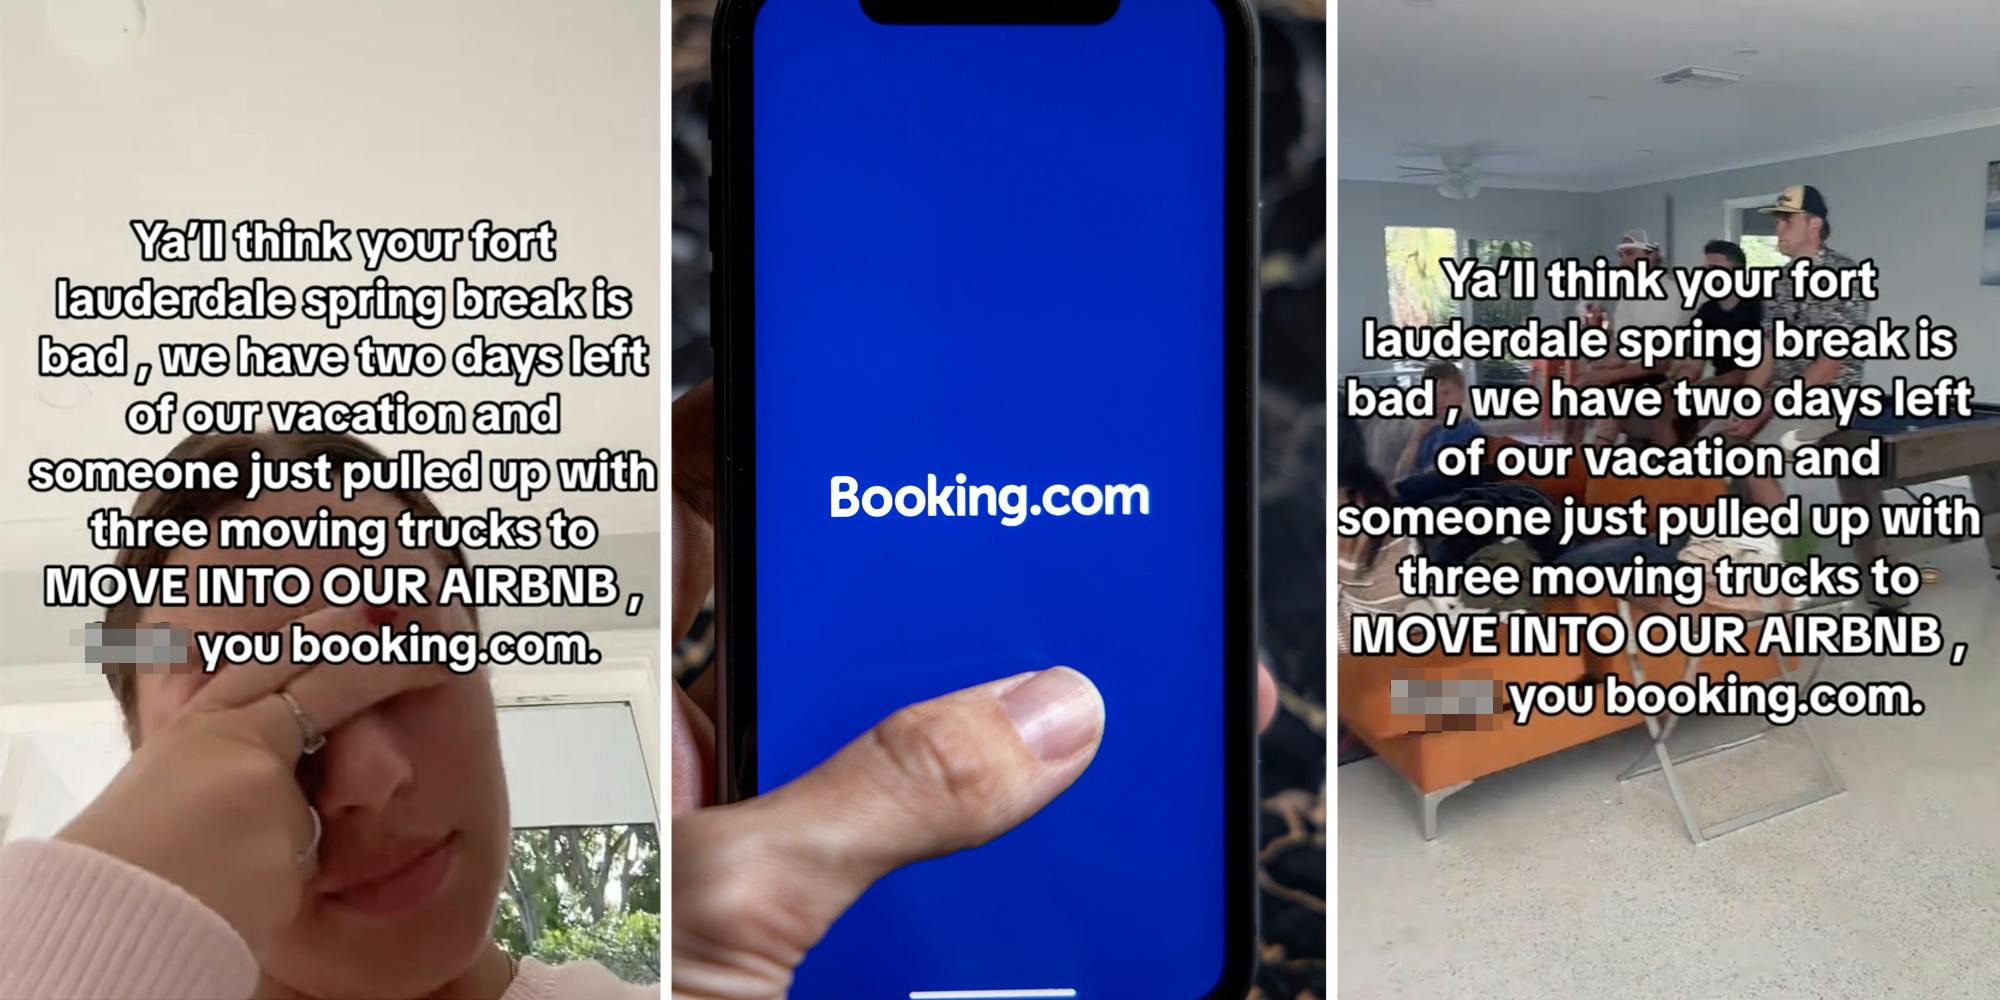 Woman with hand over her face(l), Hand holding phone with booking.com app(c), Group looking upset(r)